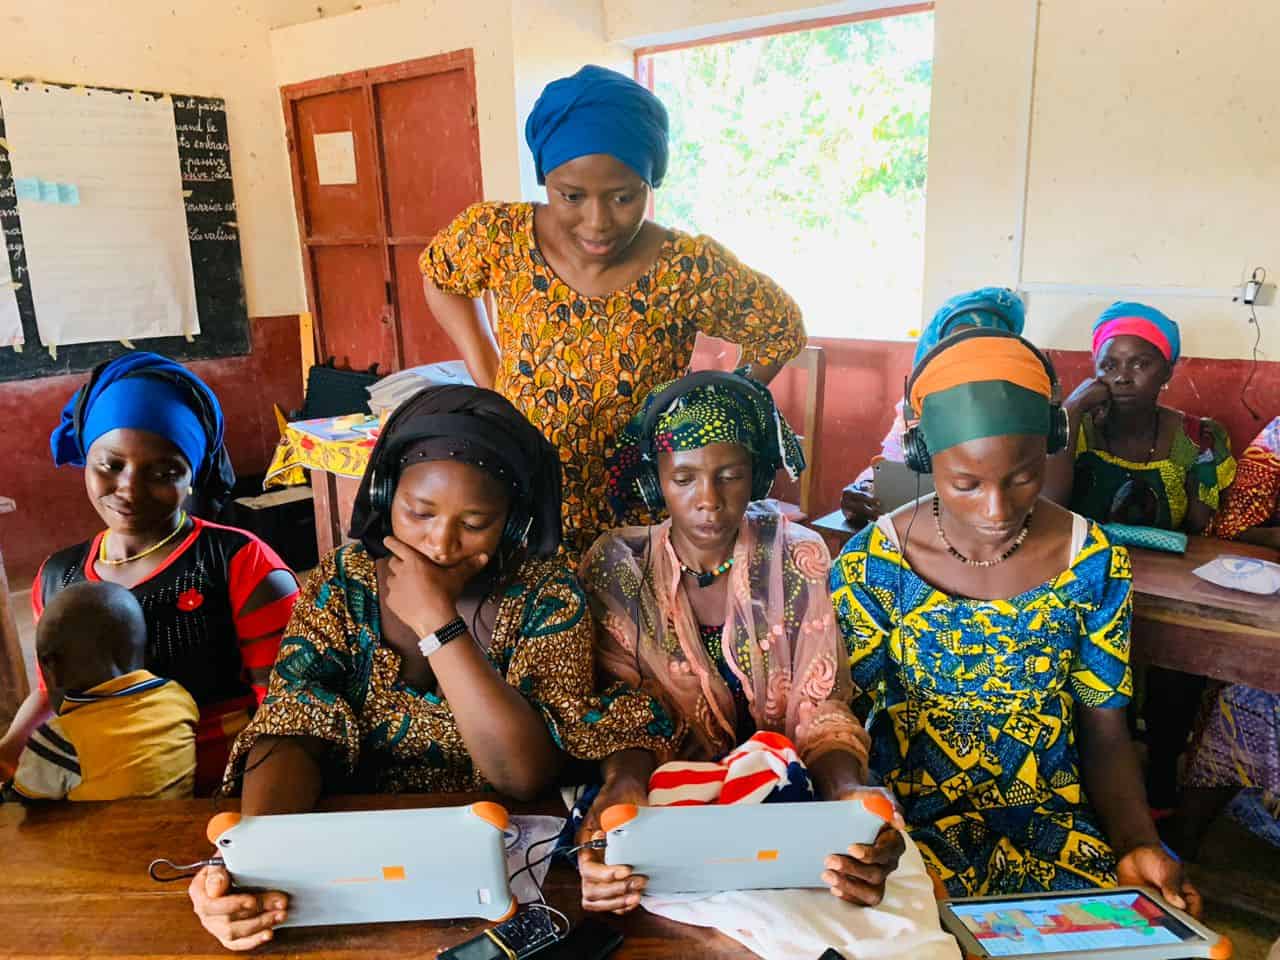 Micro-project "Women and the Palaver Tree 2.0": Action Education works for the education of women in their mother tongue through digital technology